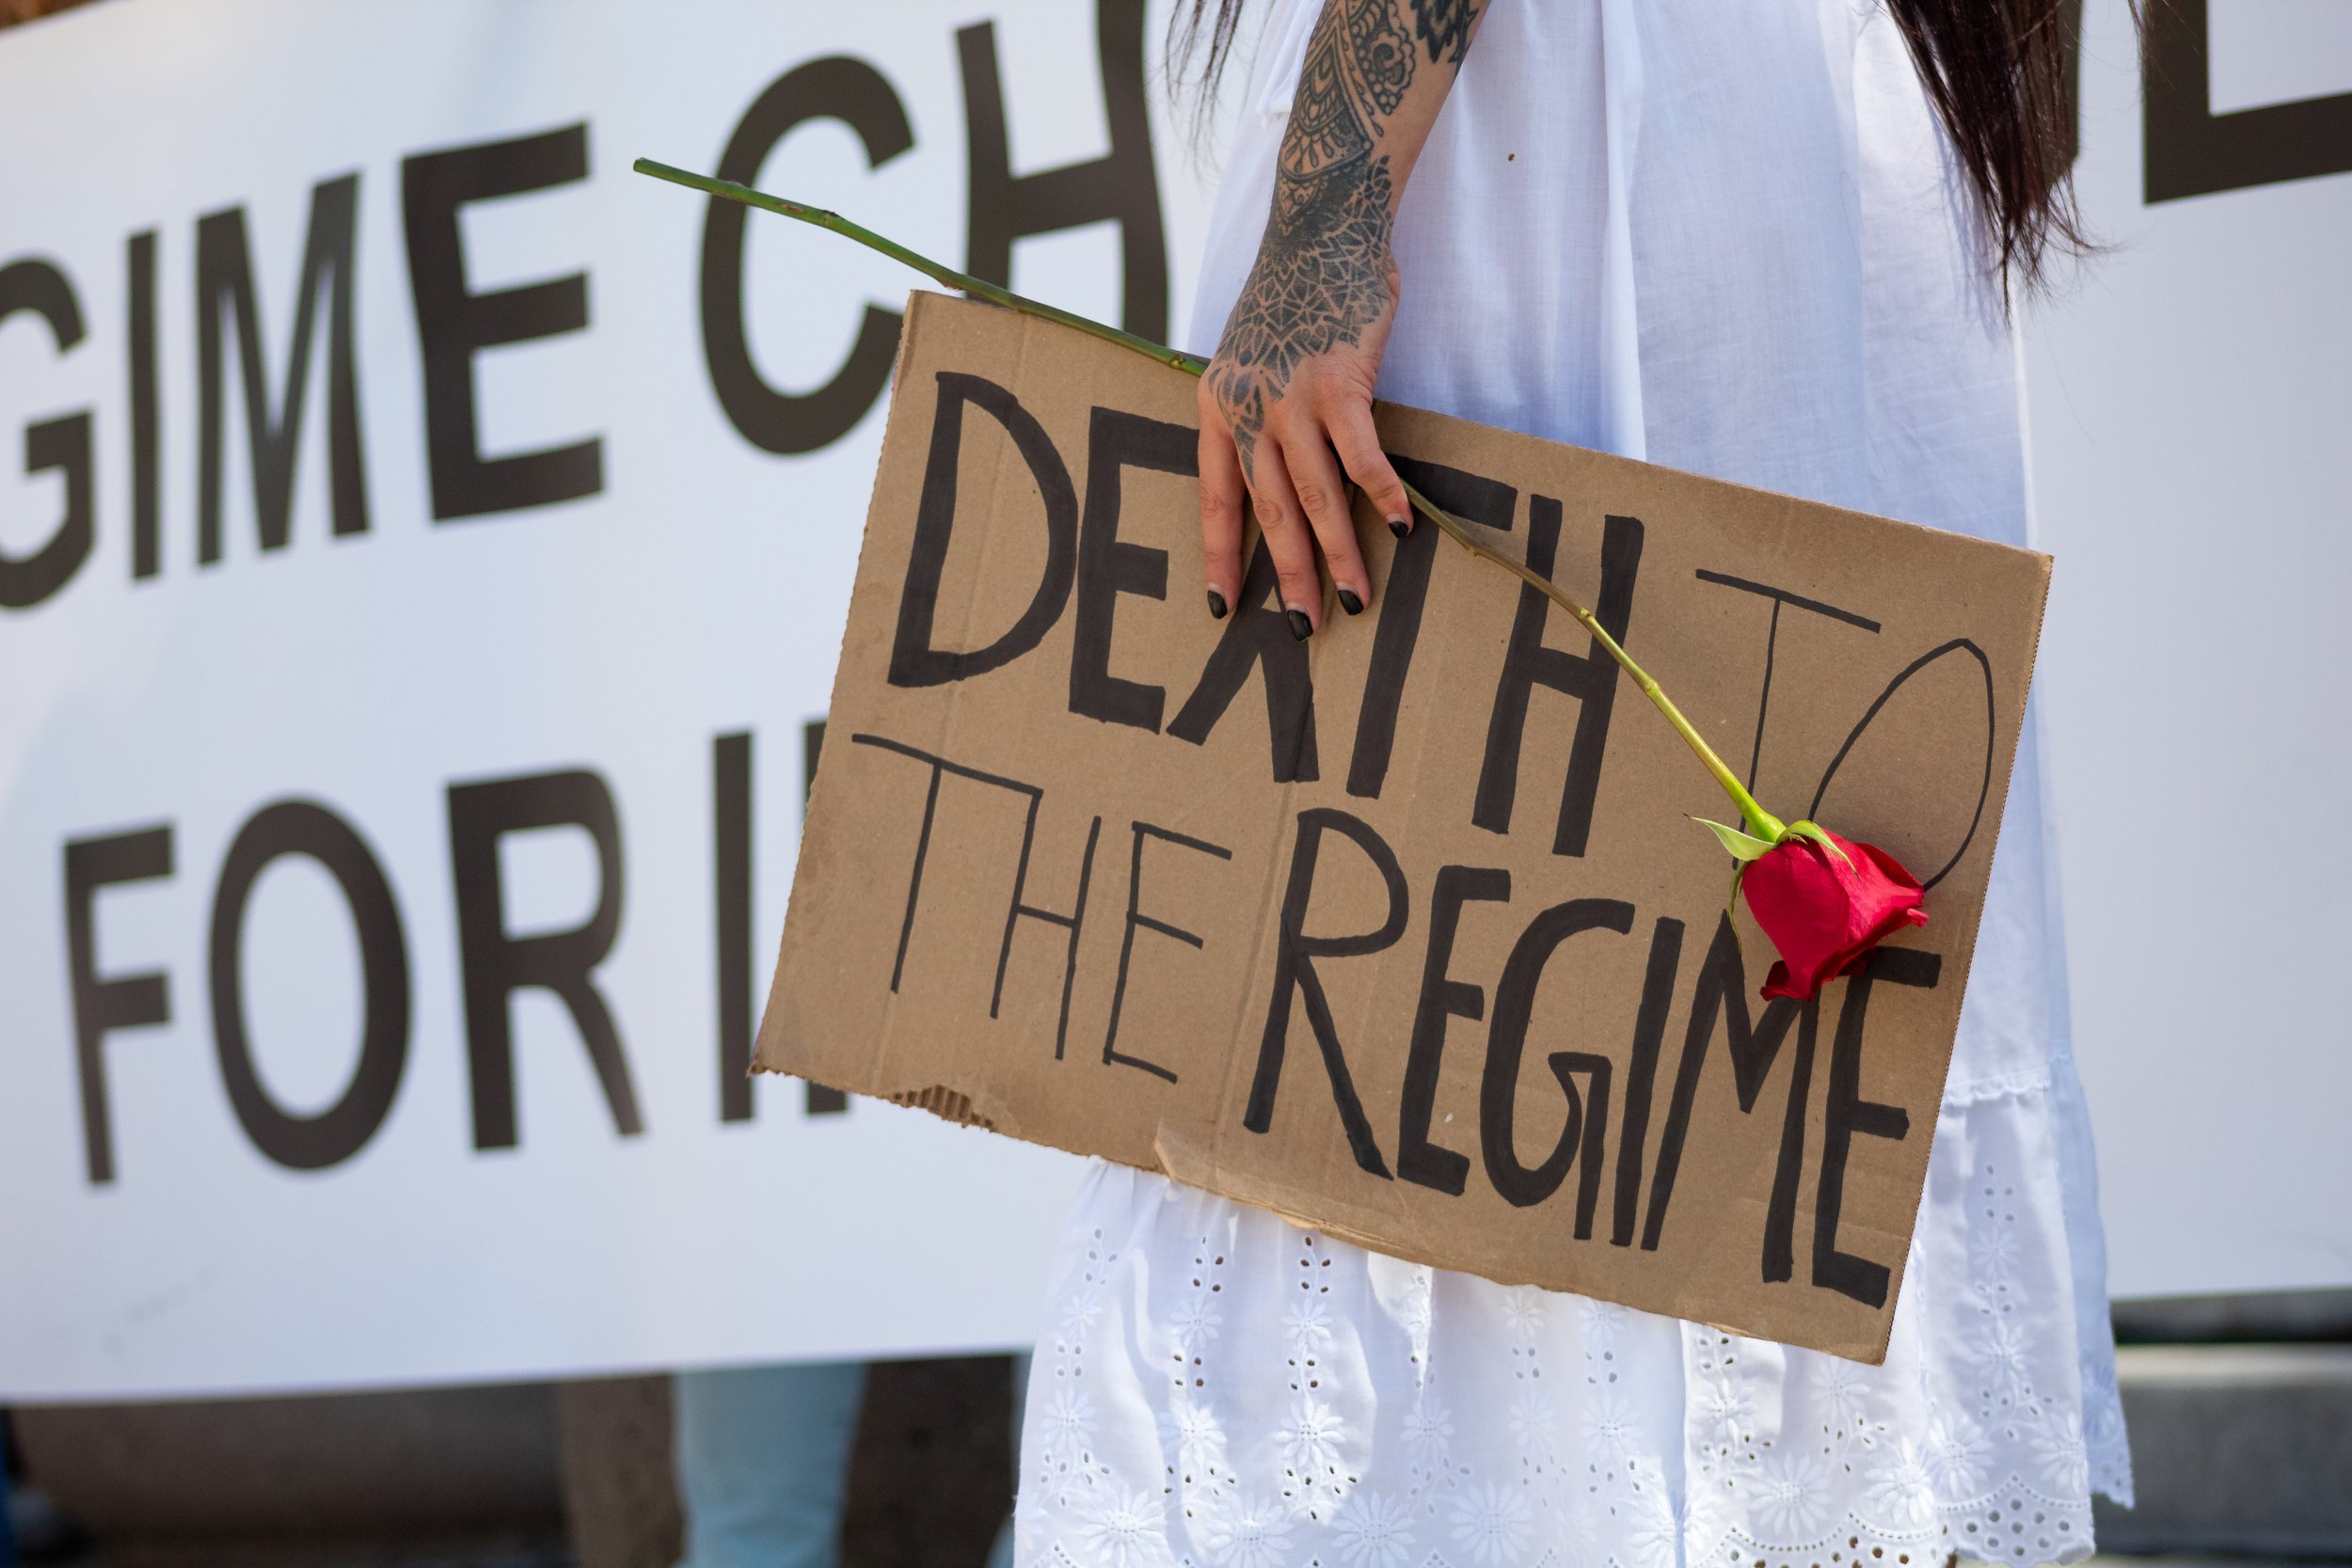  Leila [lastname withheld] holding a rose and sign that reads "death to the regime" at the Freedom For Iran rally on the steps of Los Angeles City Hall. The rally marched from Pershing Square with at least a thousand people in attendance as well as b